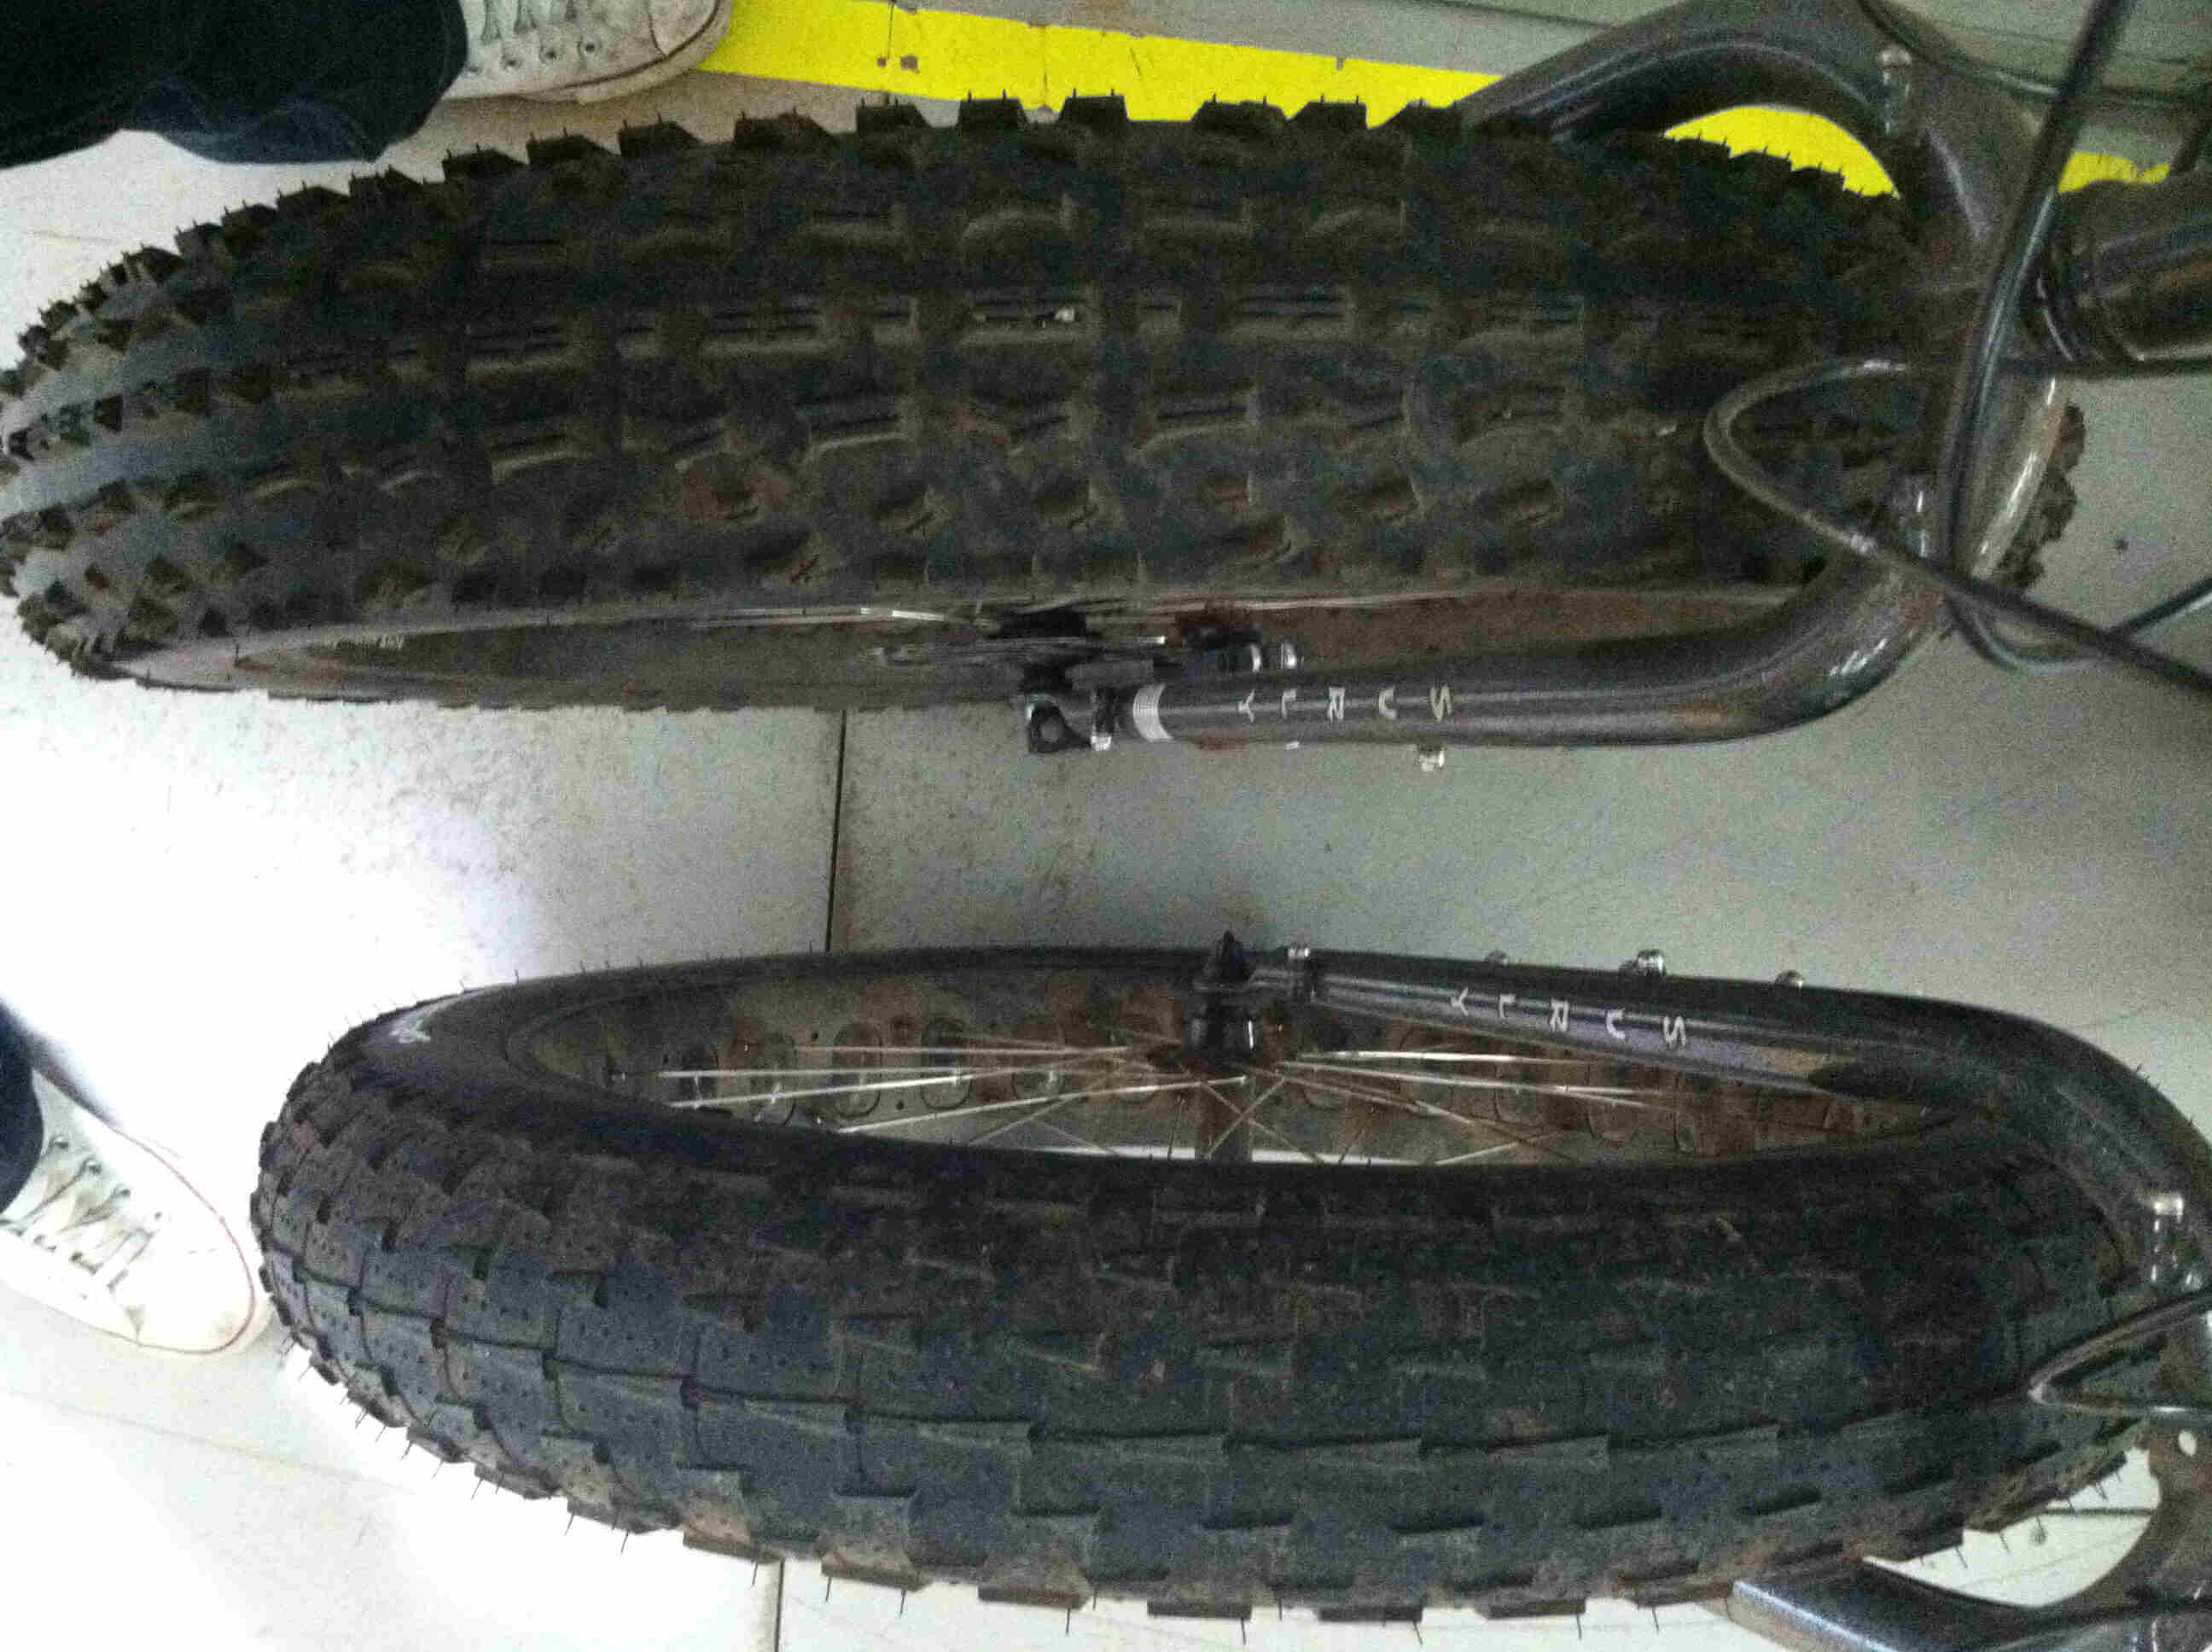 Downward, front end view of the wheels from 2 Surly fat bikes, that are parked side by side on a cement floor